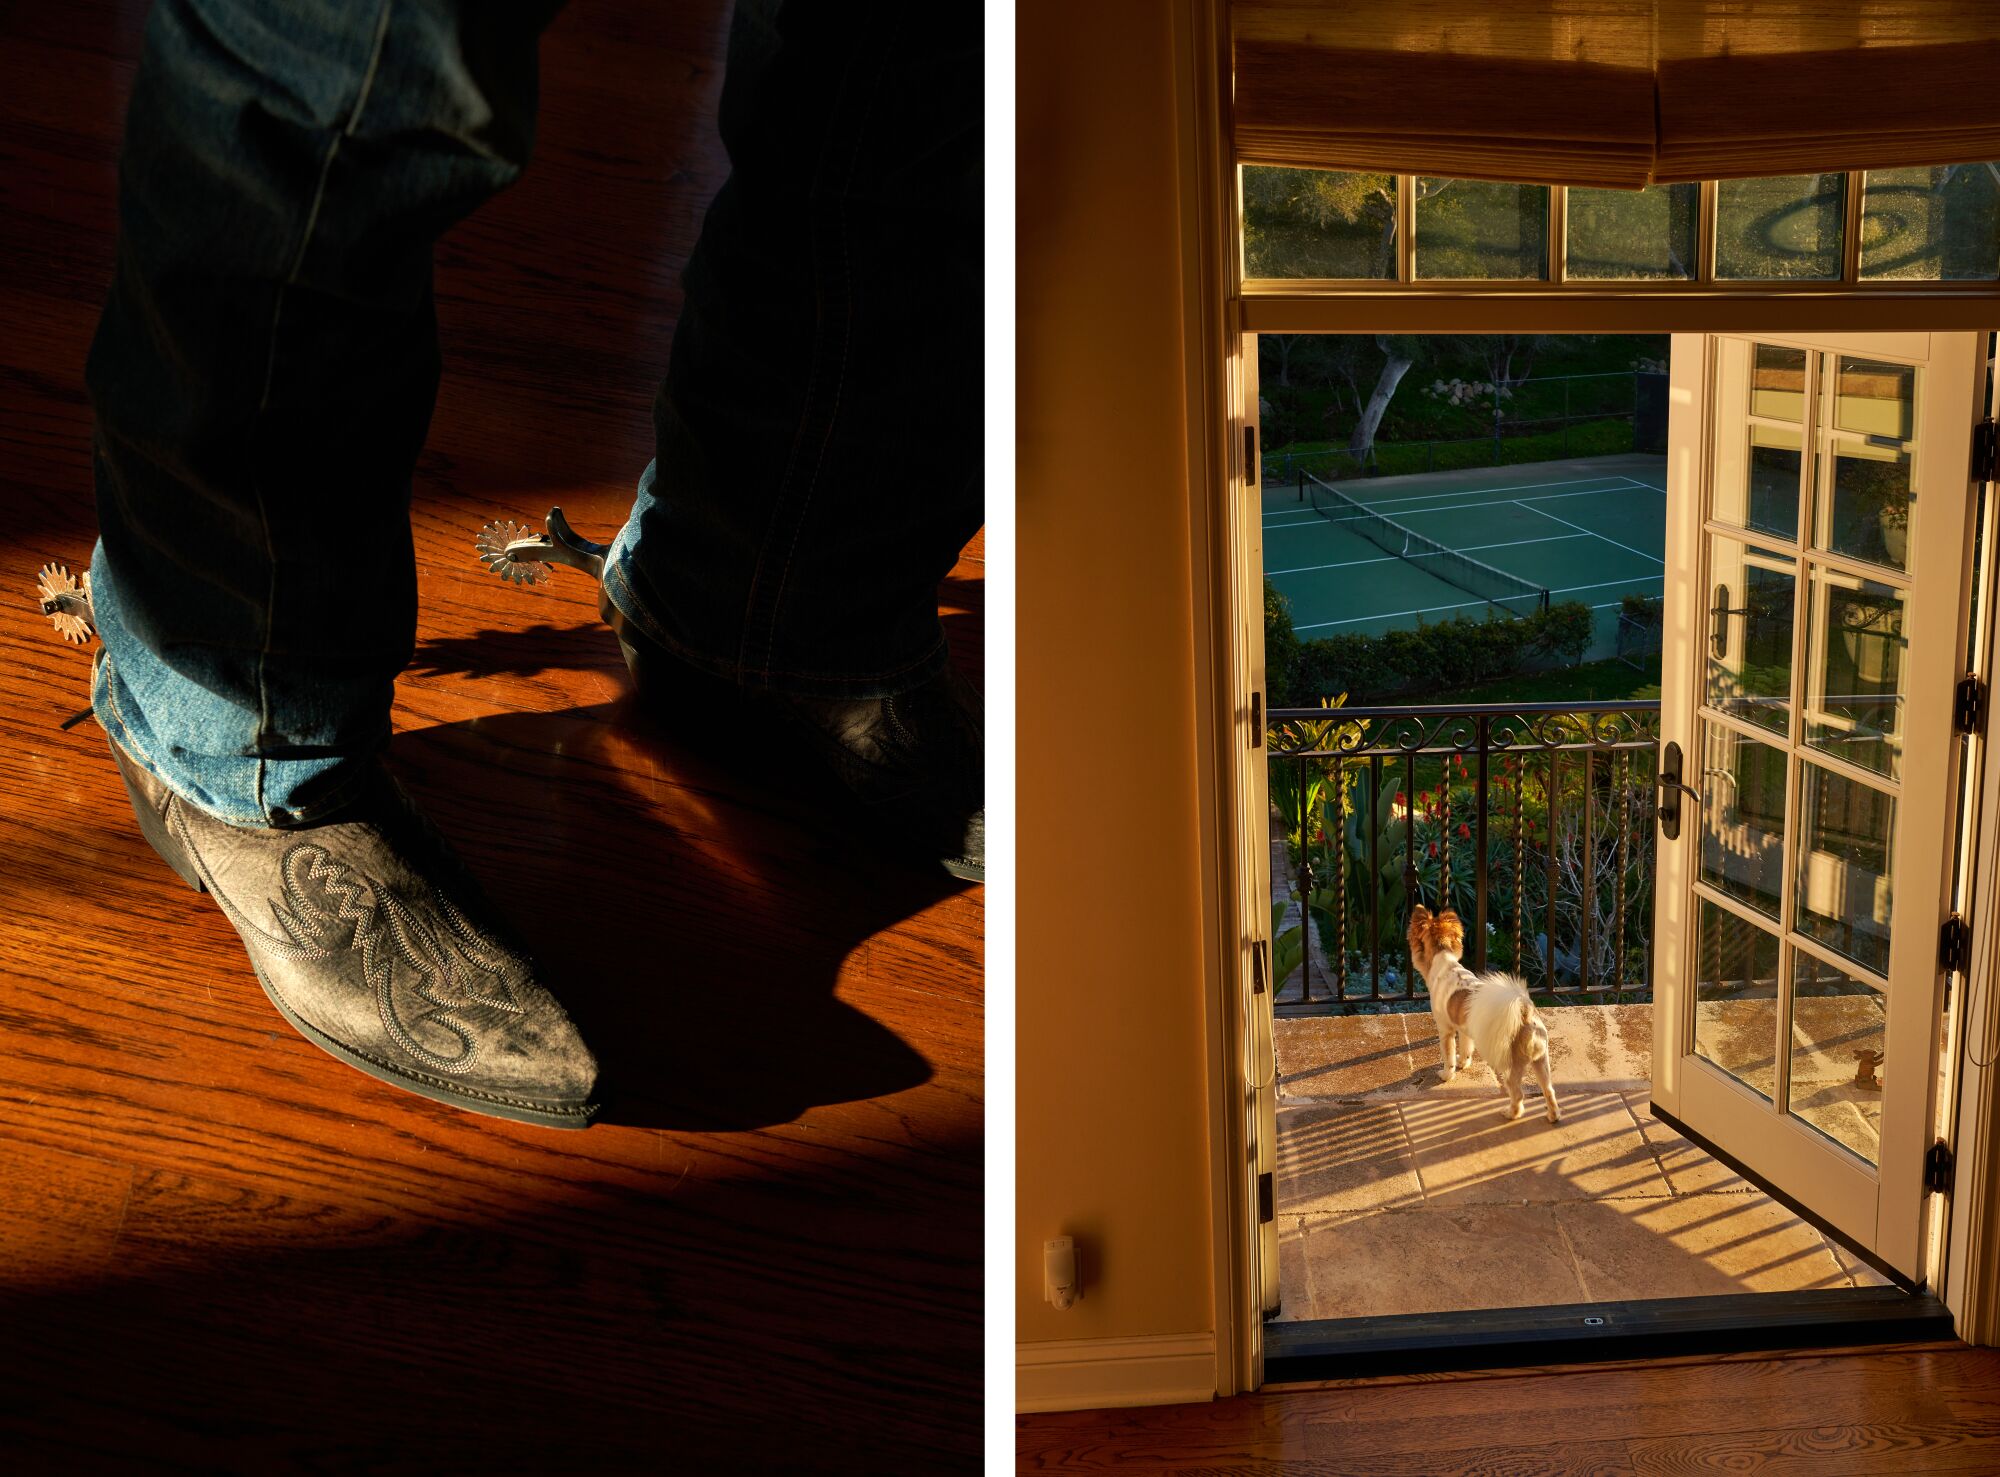 In a split photograph, a man's boots, left, and a dog on a balcony, right.